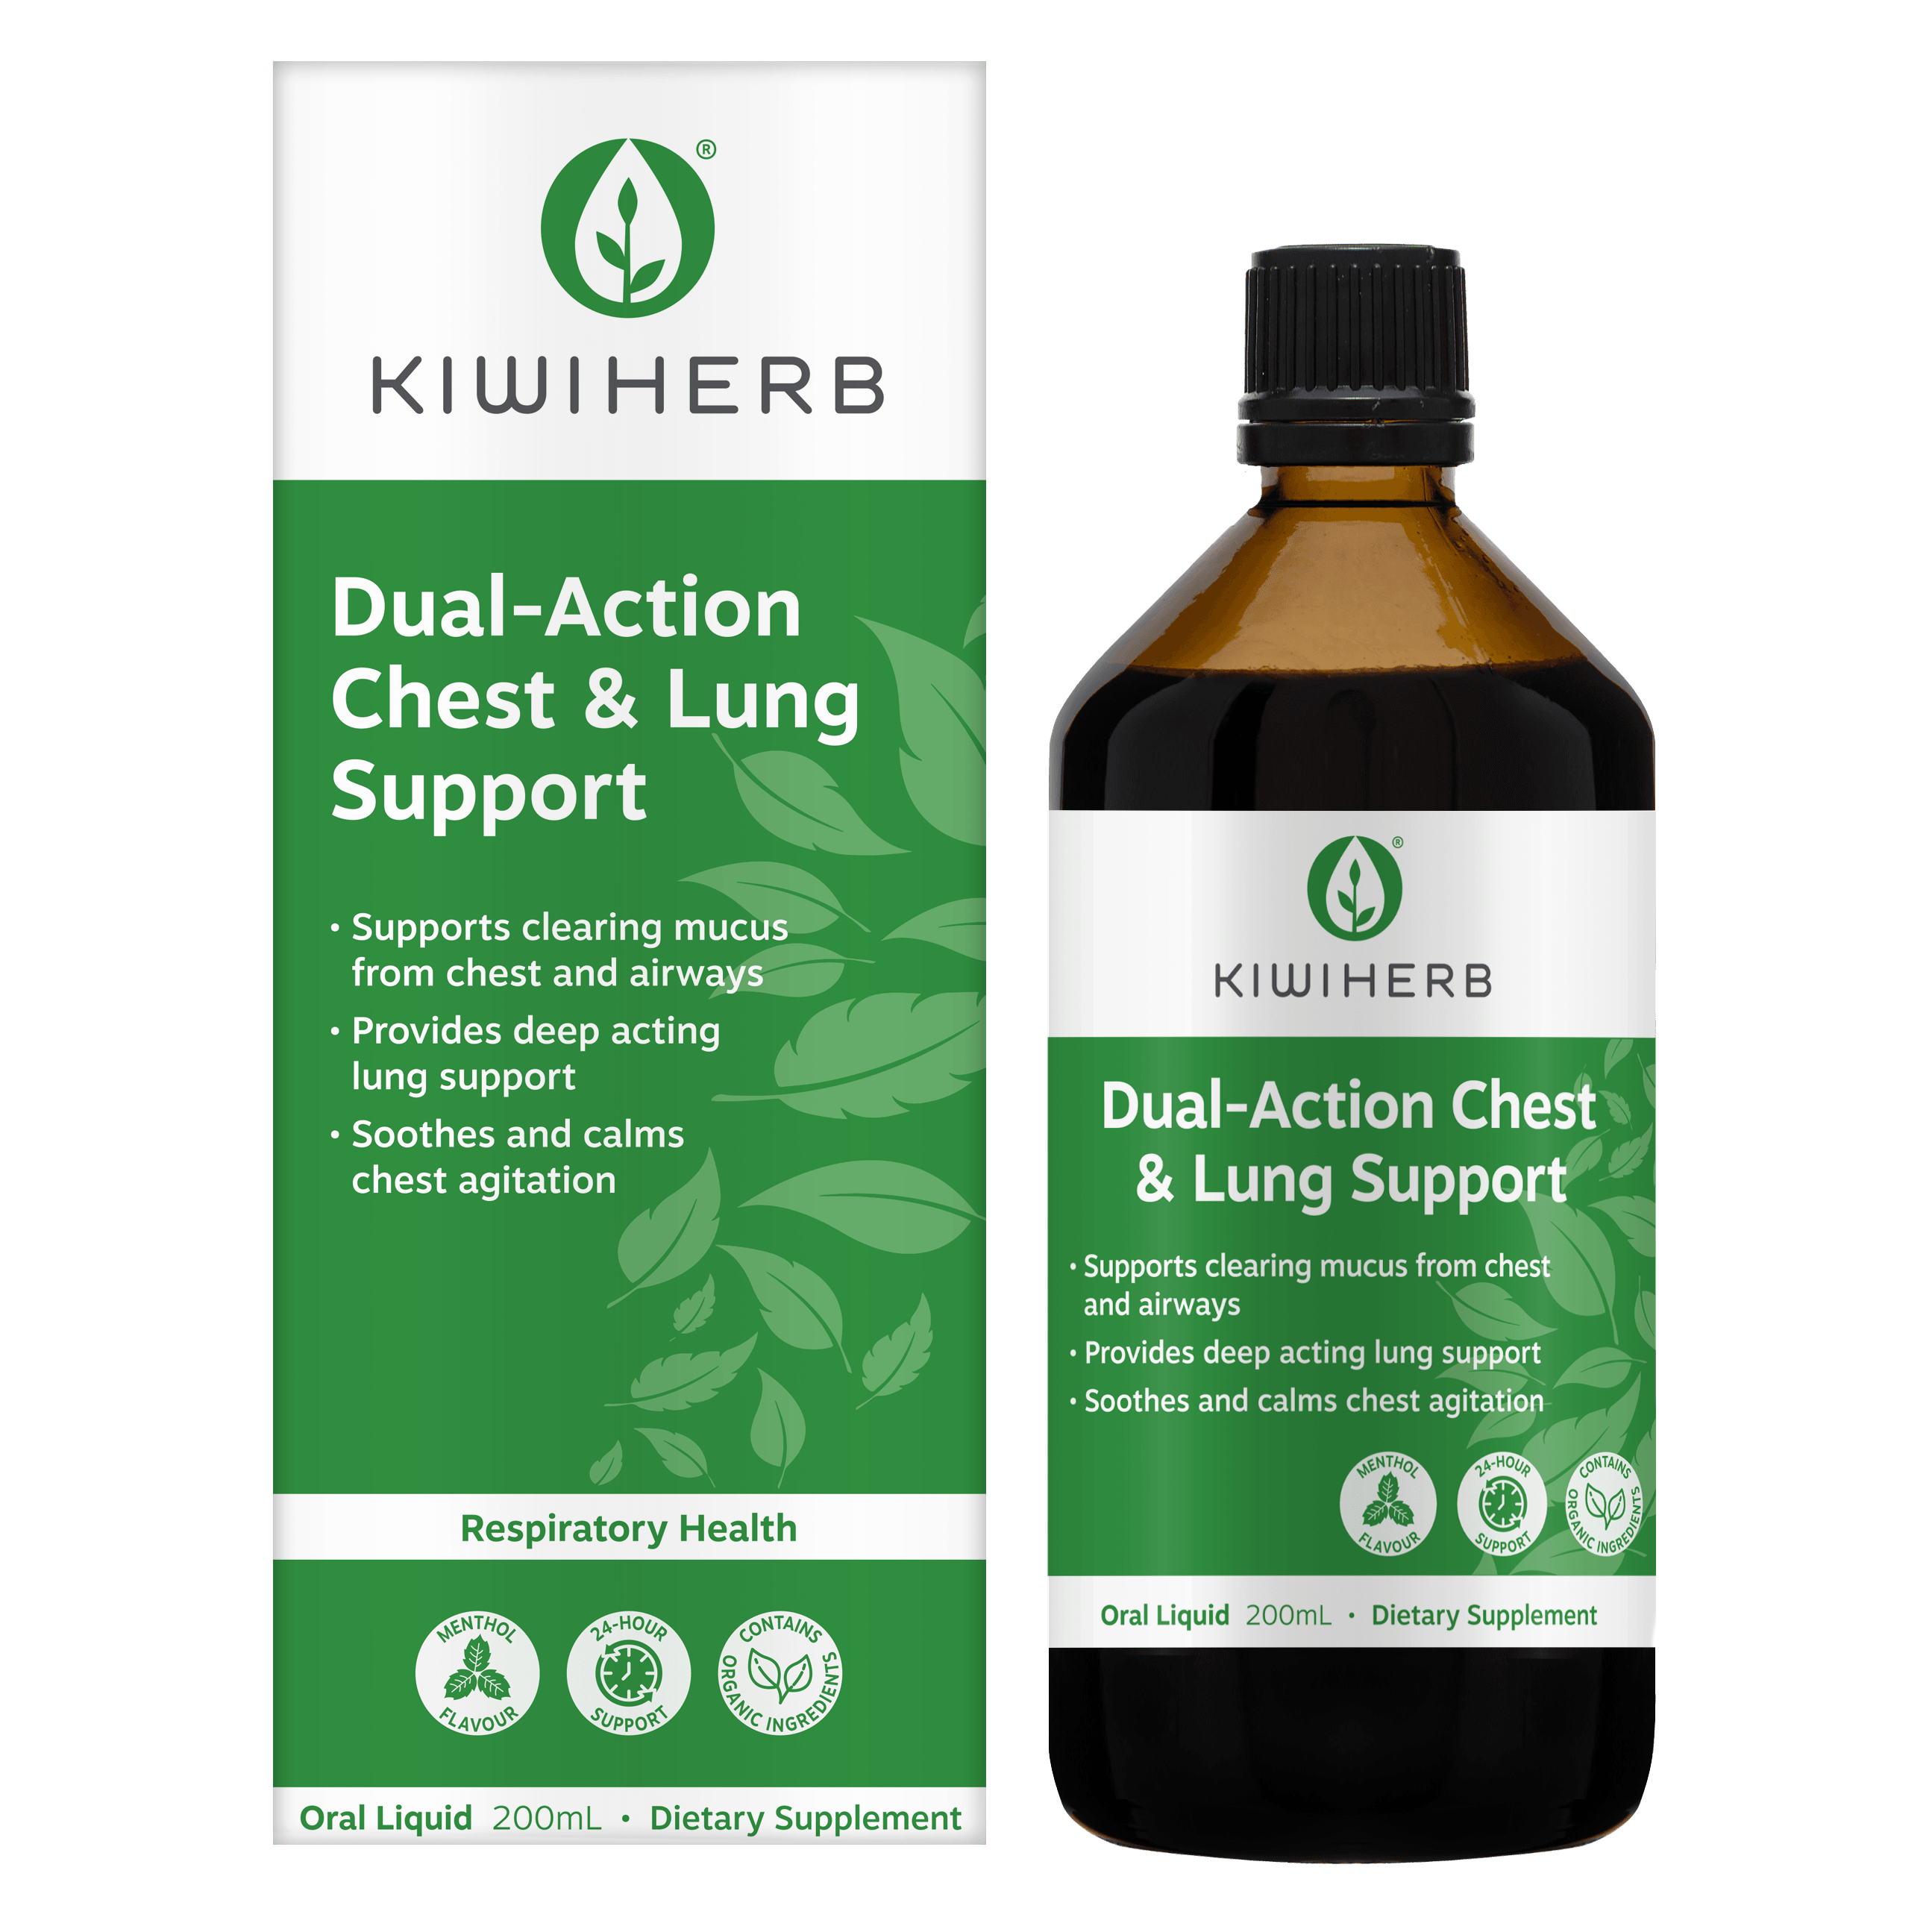 Kiwiherb Dual-Action Chest & Lung Support